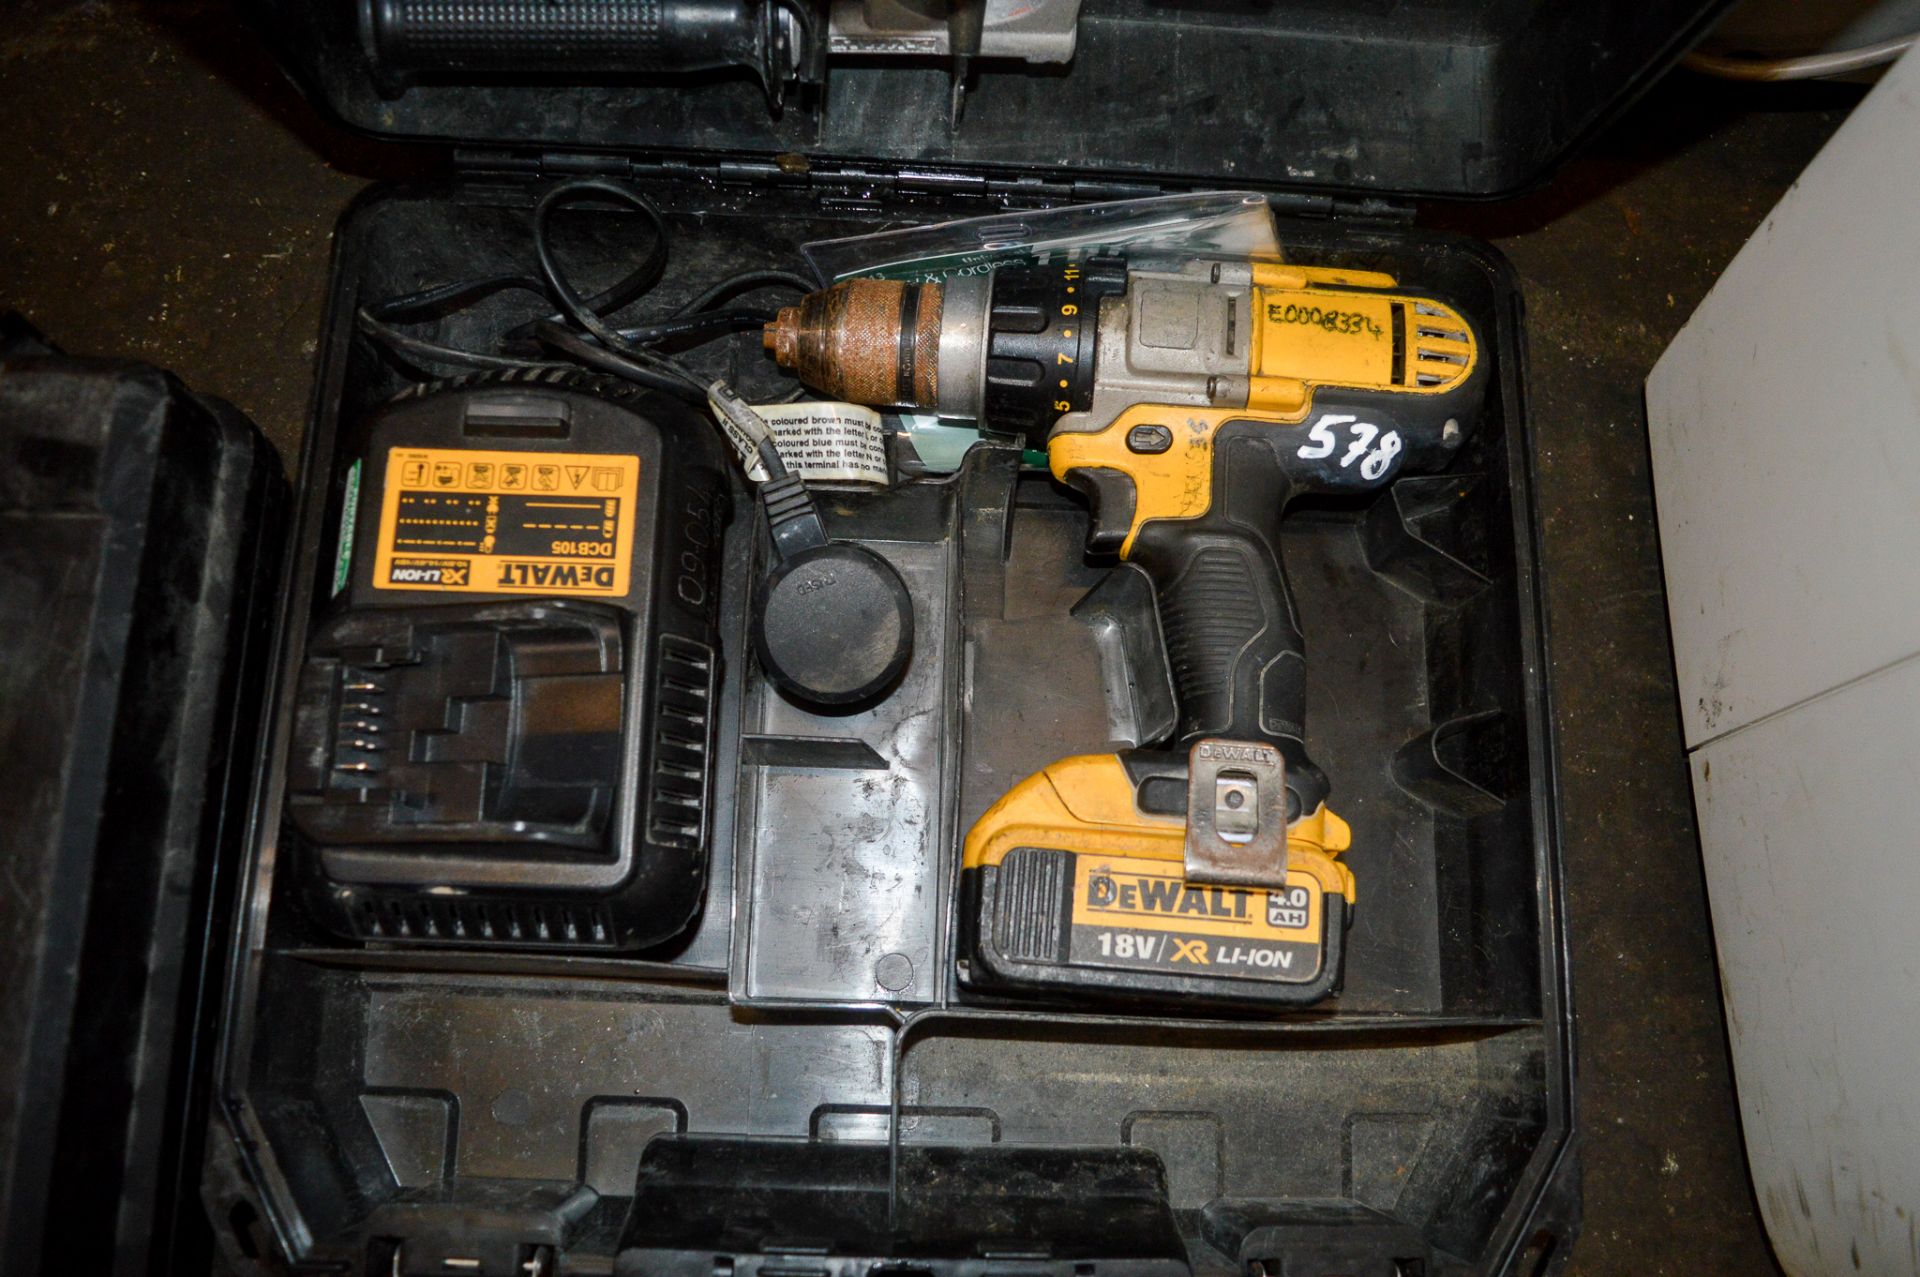 Dewalt 18v cordless power drill c/w battery, charger & carry case